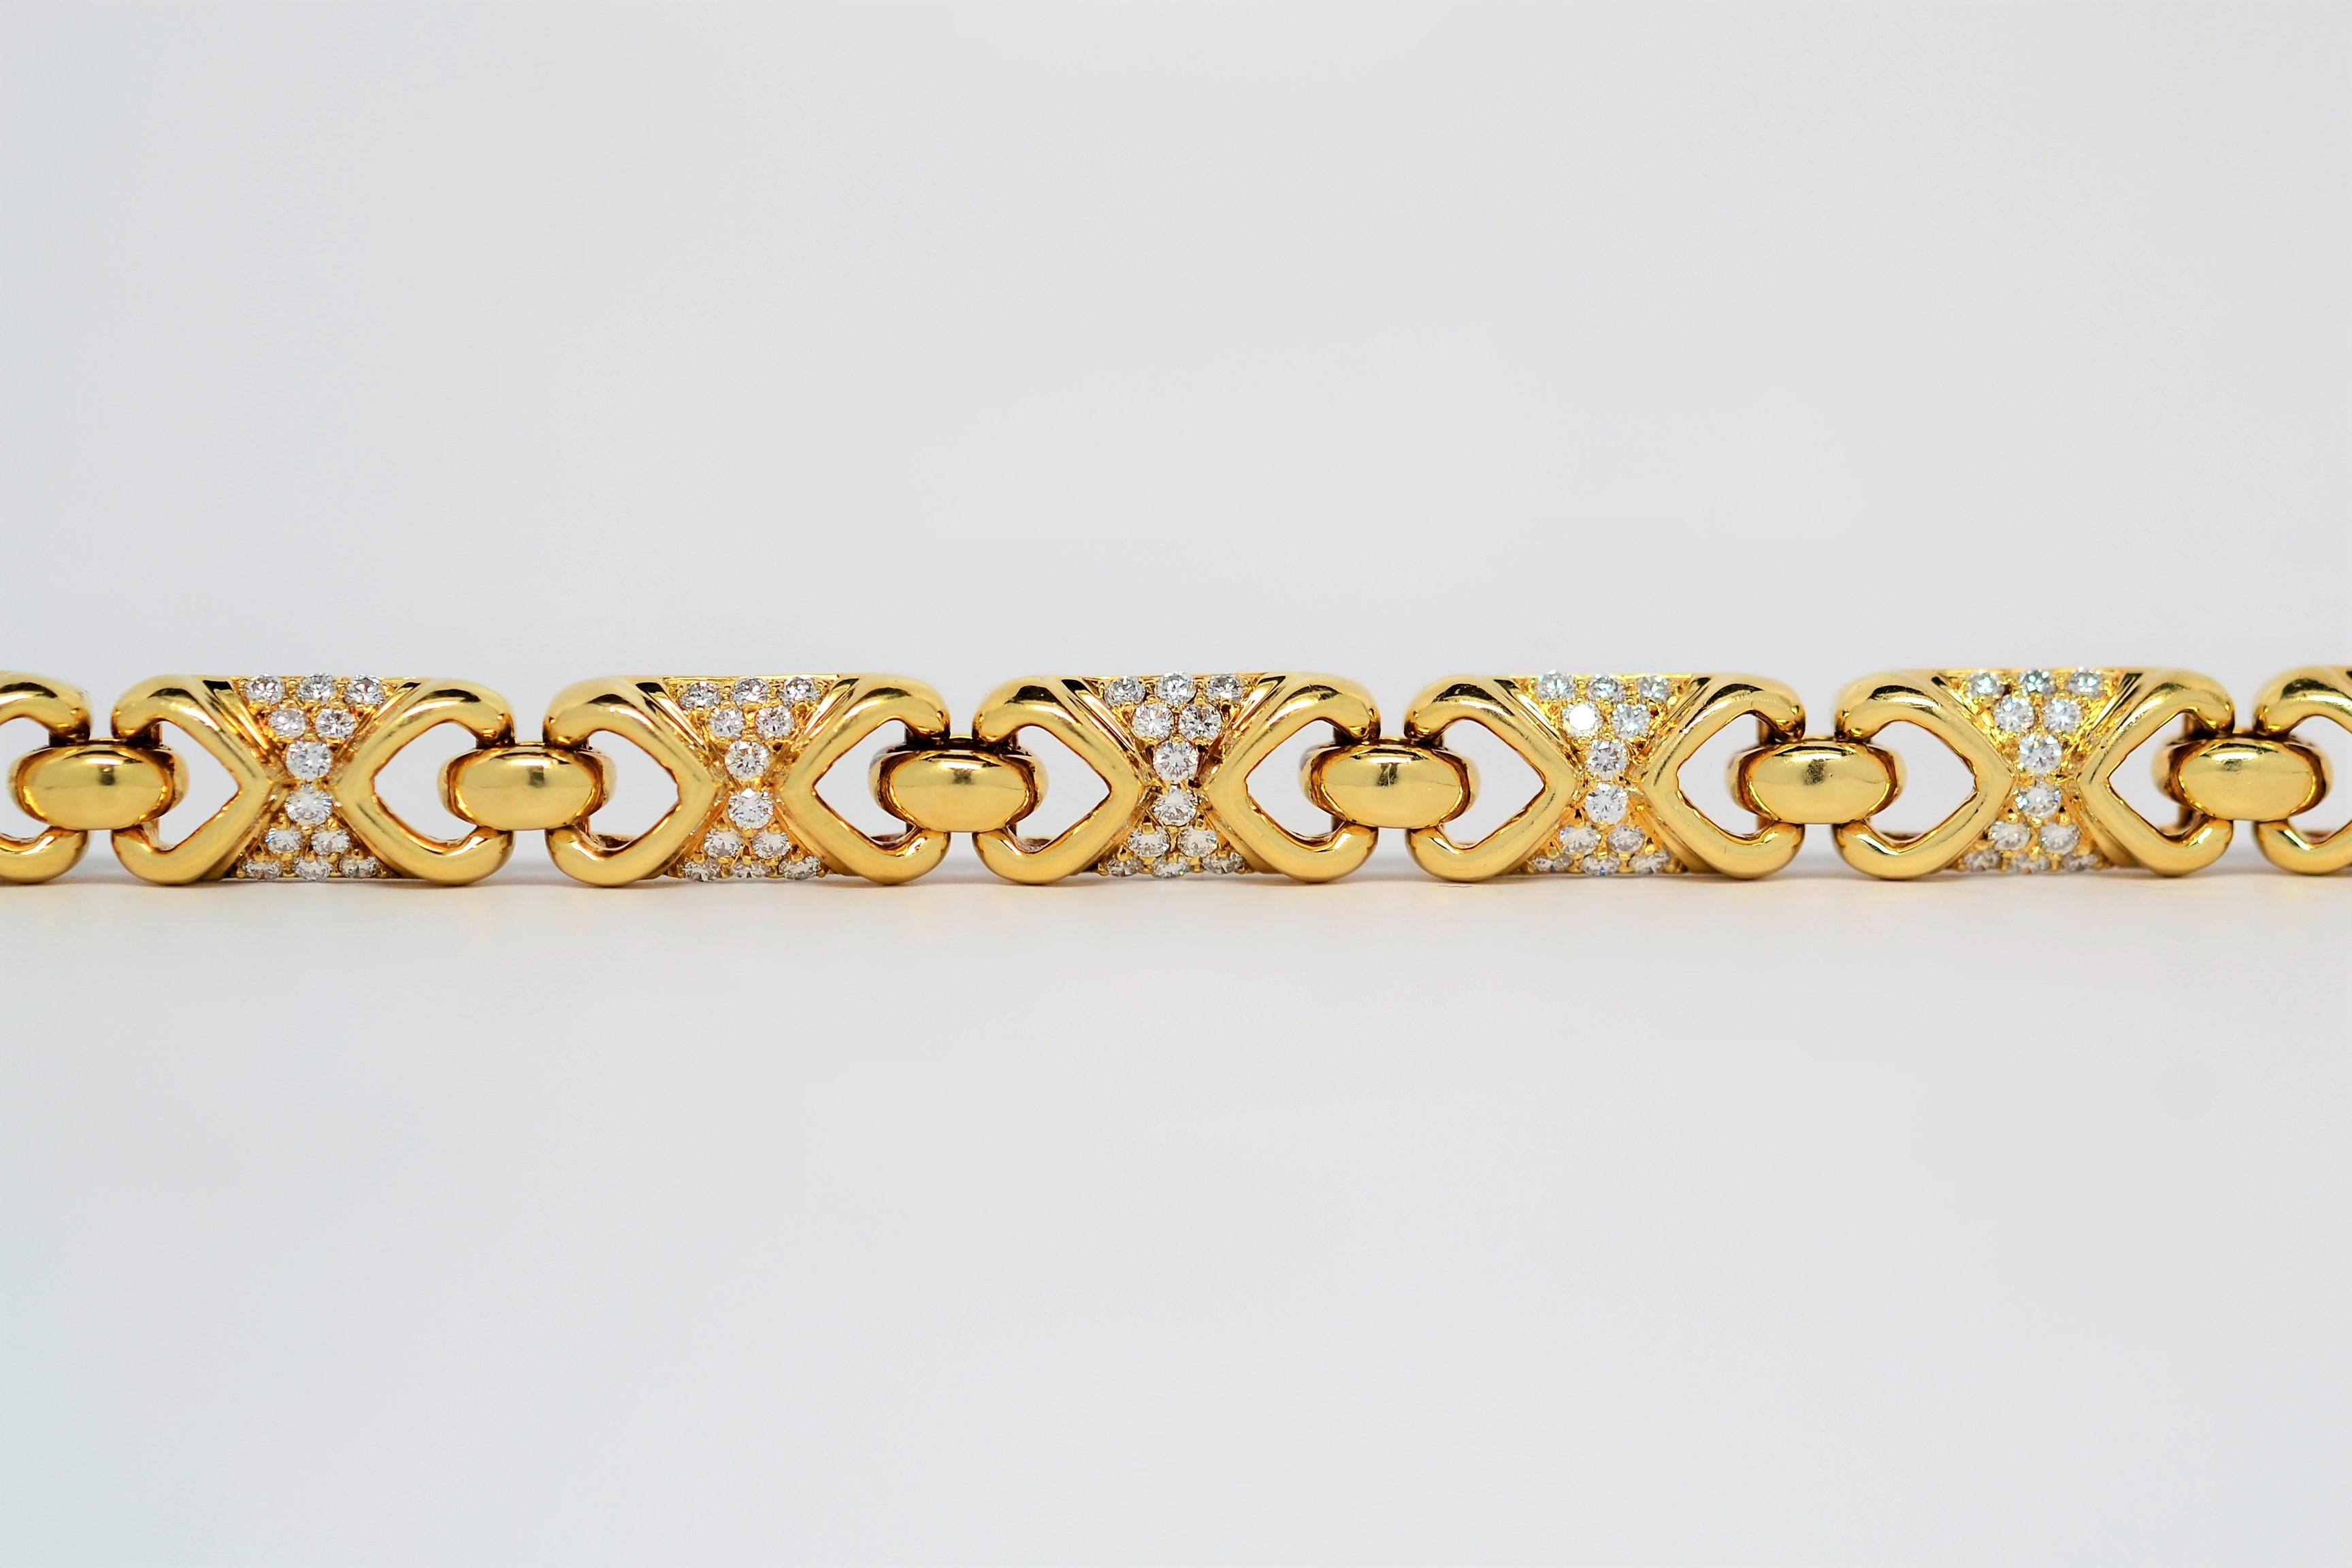 This custom made bracelet is set in 18K Yellow Gold using a multi-link layout with Round Brilliant Cut Diamonds. A traditional tongue and clasp for security with secondary lock. The bracelet measures 7